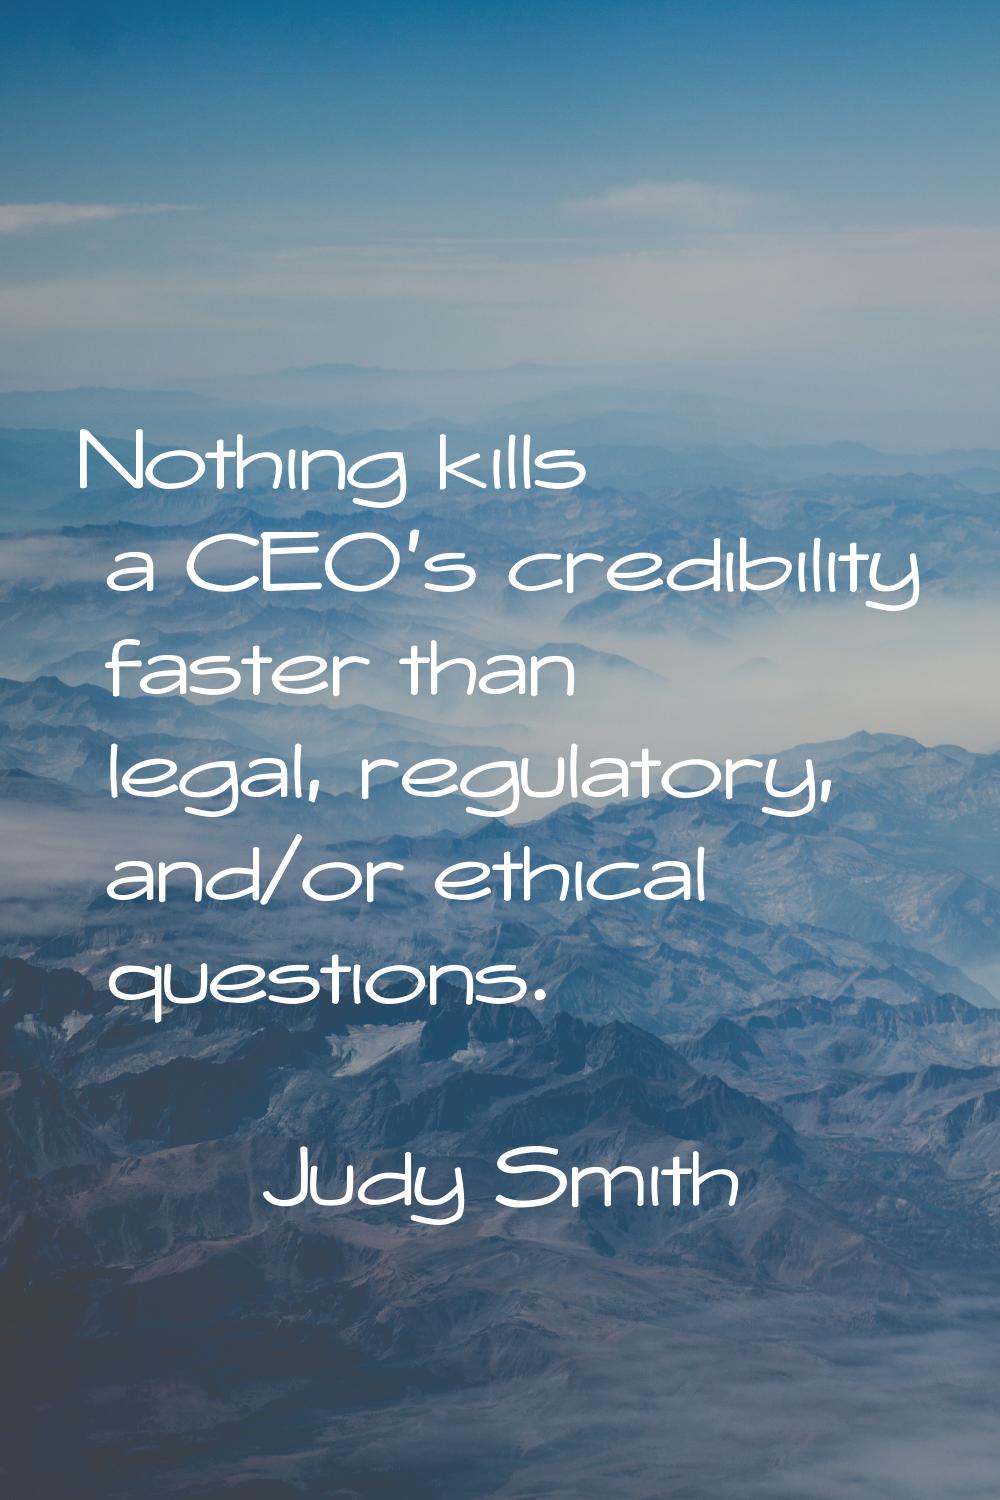 Nothing kills a CEO's credibility faster than legal, regulatory, and/or ethical questions.